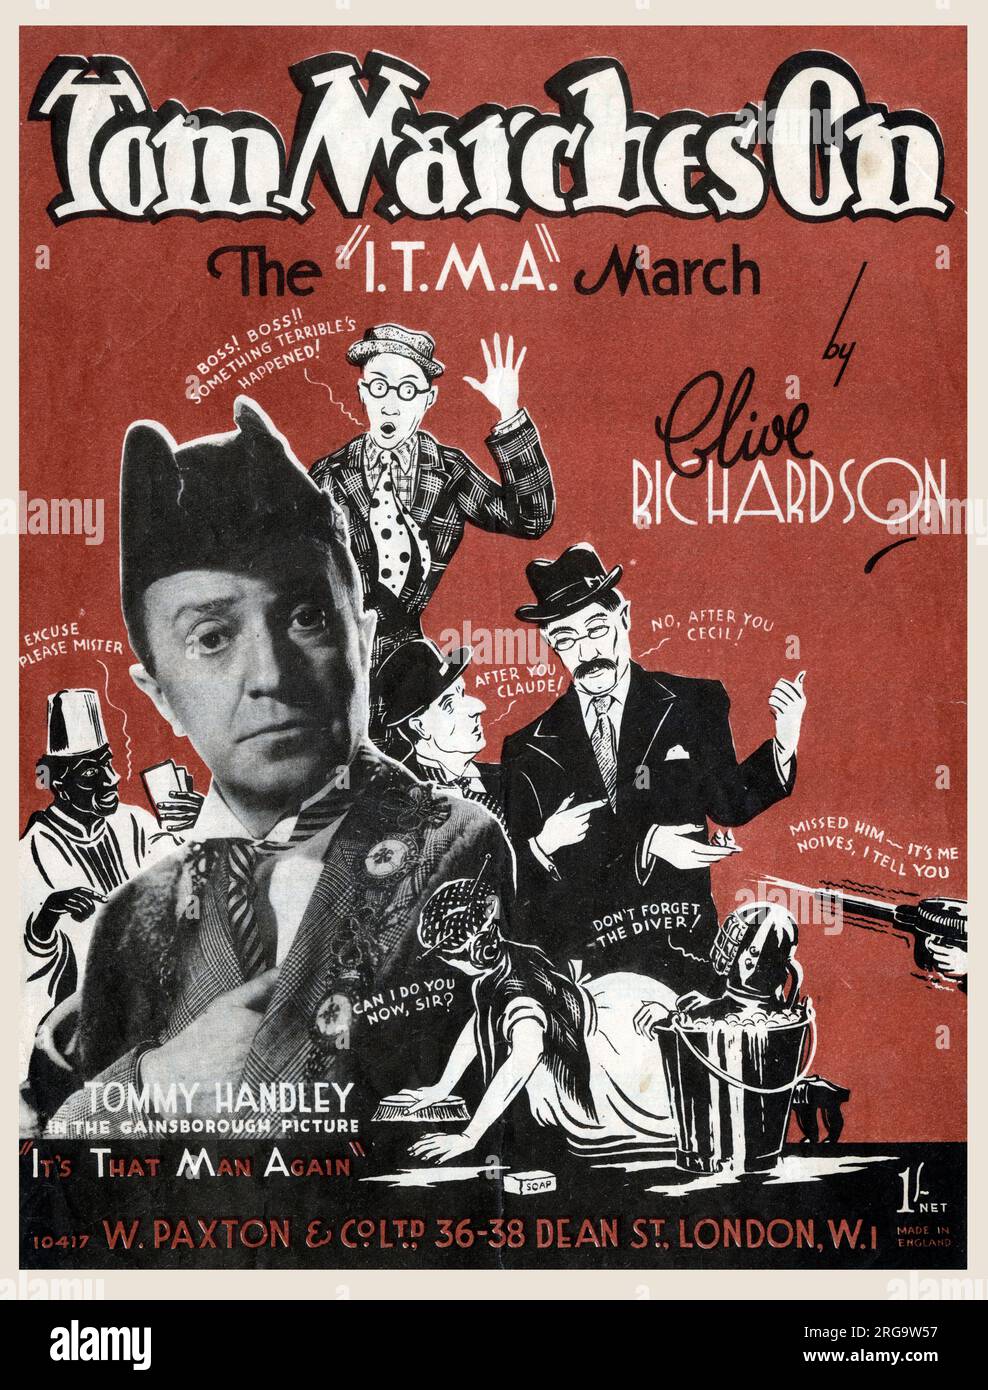 Musik-Cover, Tom Marches On - The ITMA March - IT's That That Again - von Clive Richardson. Stockfoto